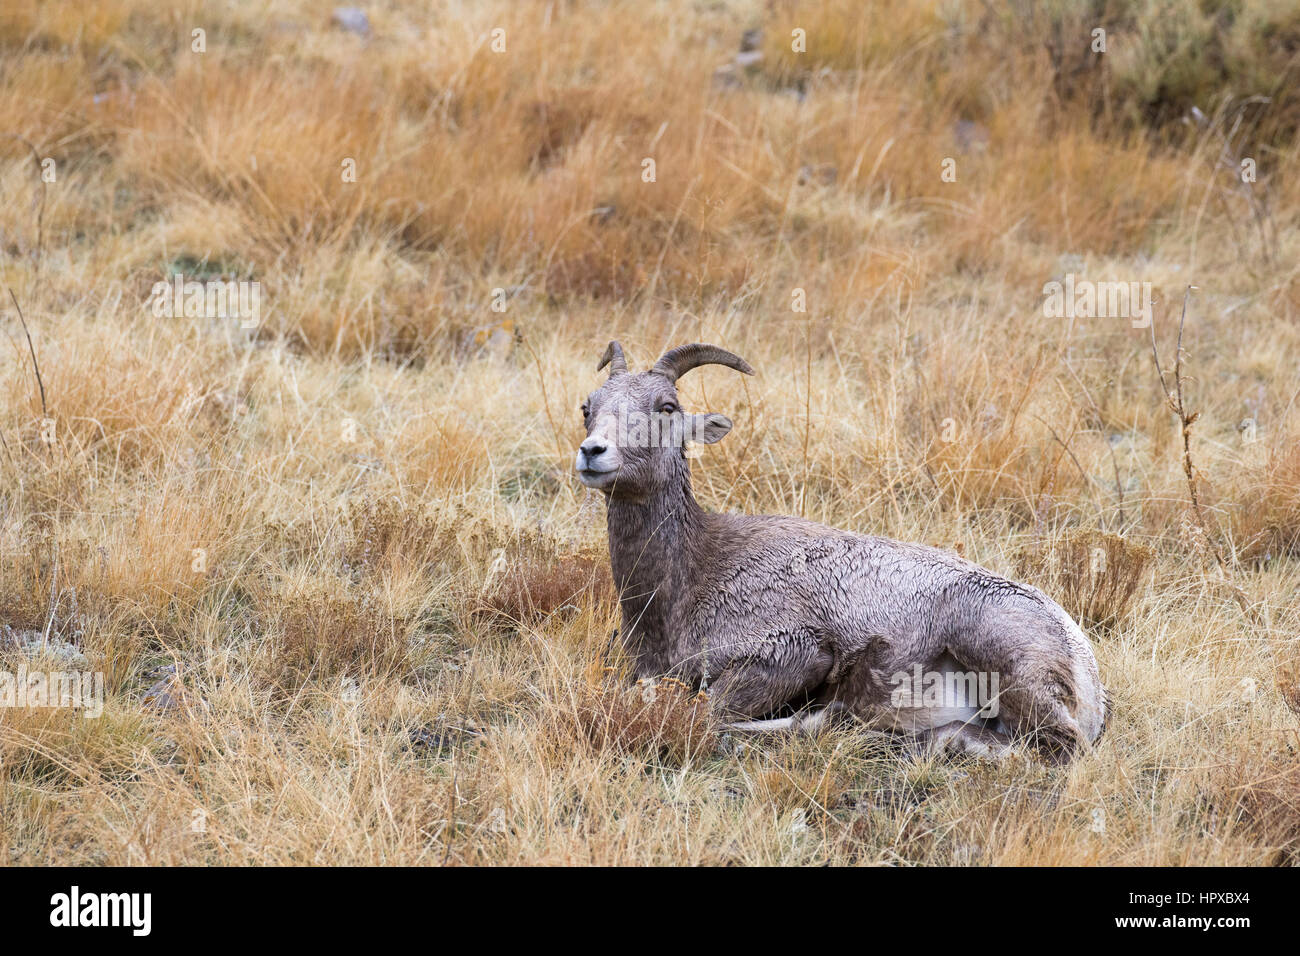 Nap time for bighorn sheep ewe, time to ruminate in grass Stock Photo